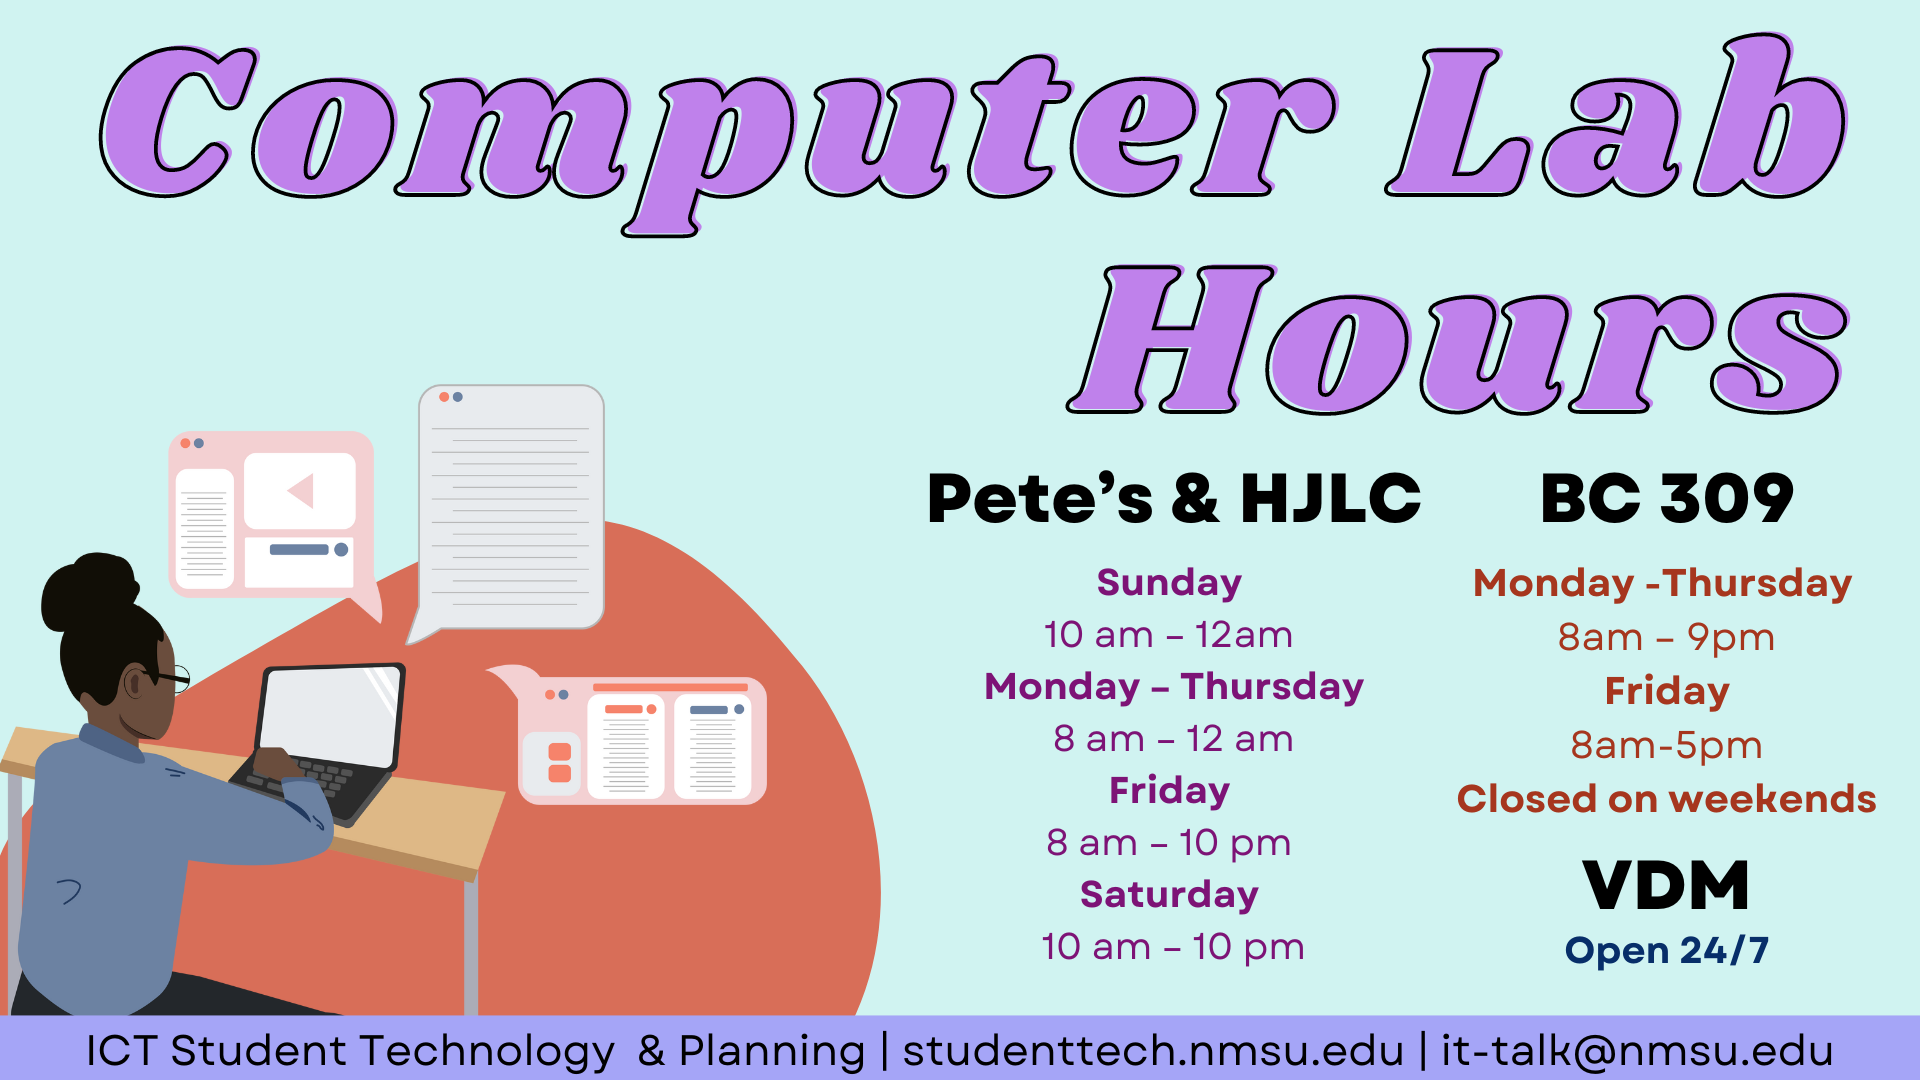 For lab hours, visit studenttech.nmsu.edu/labs.